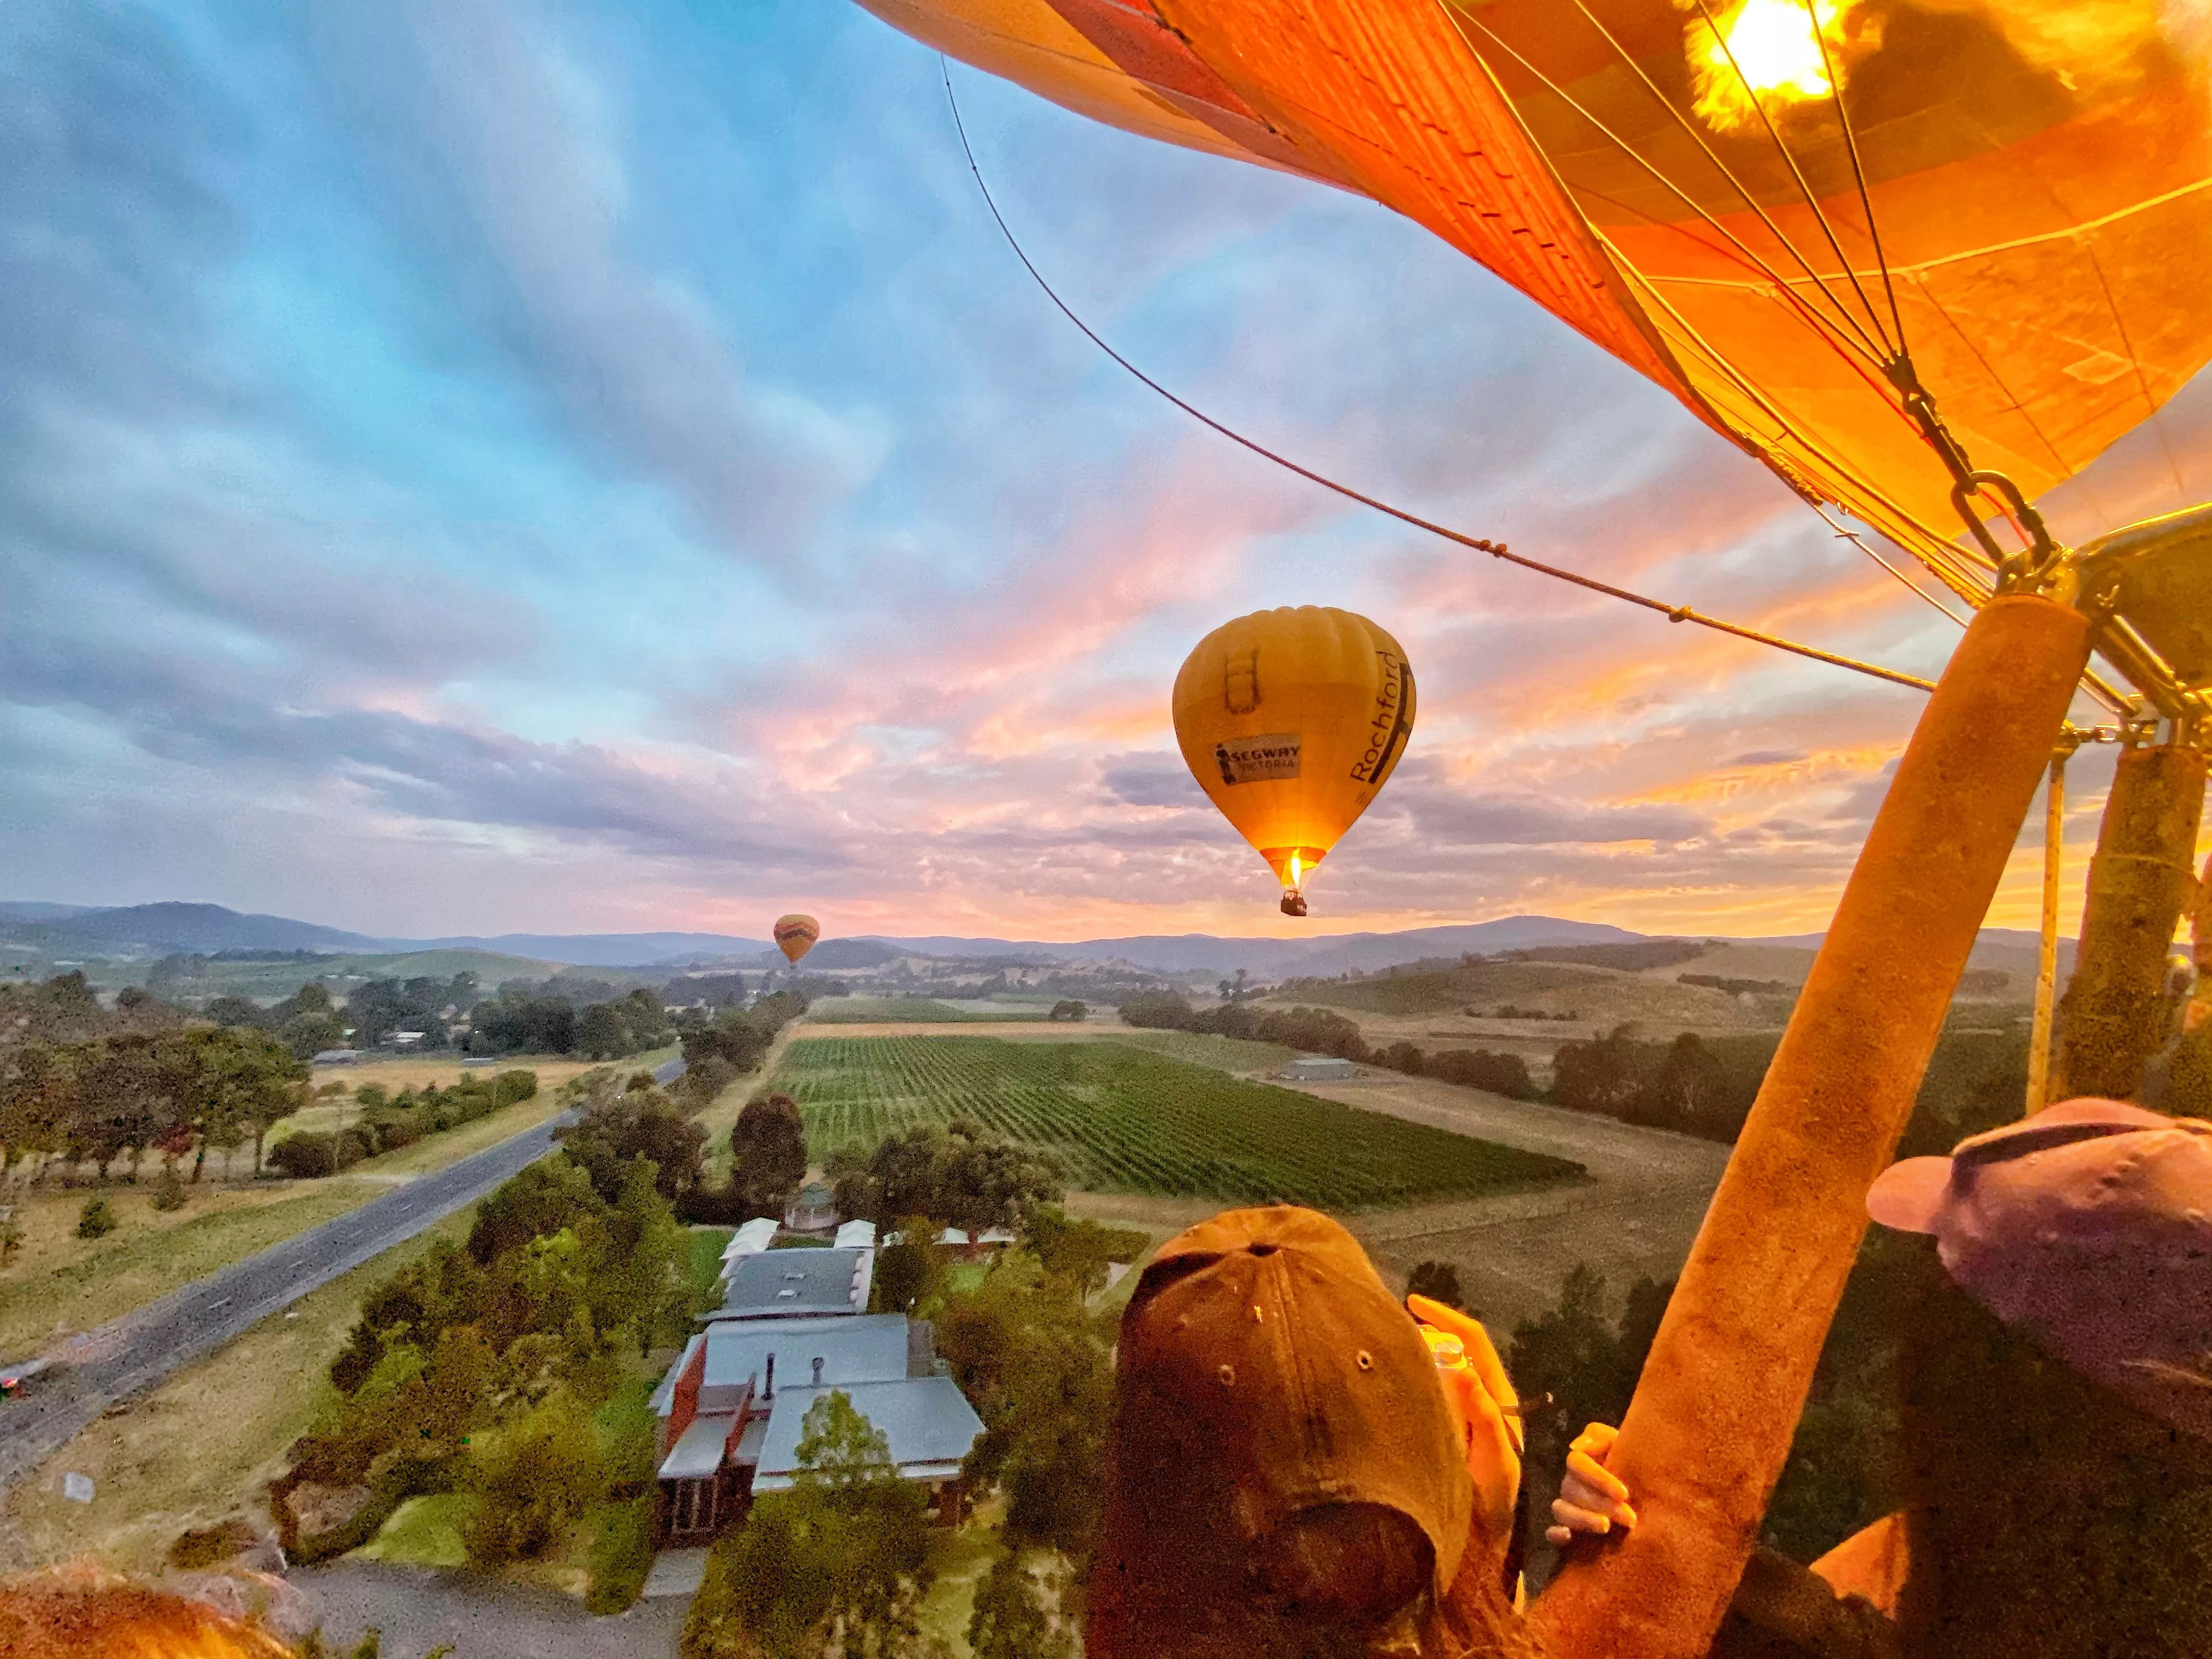 BalloonMan in Australia, Australia and Oceania | Hot Air Ballooning - Rated 4.6